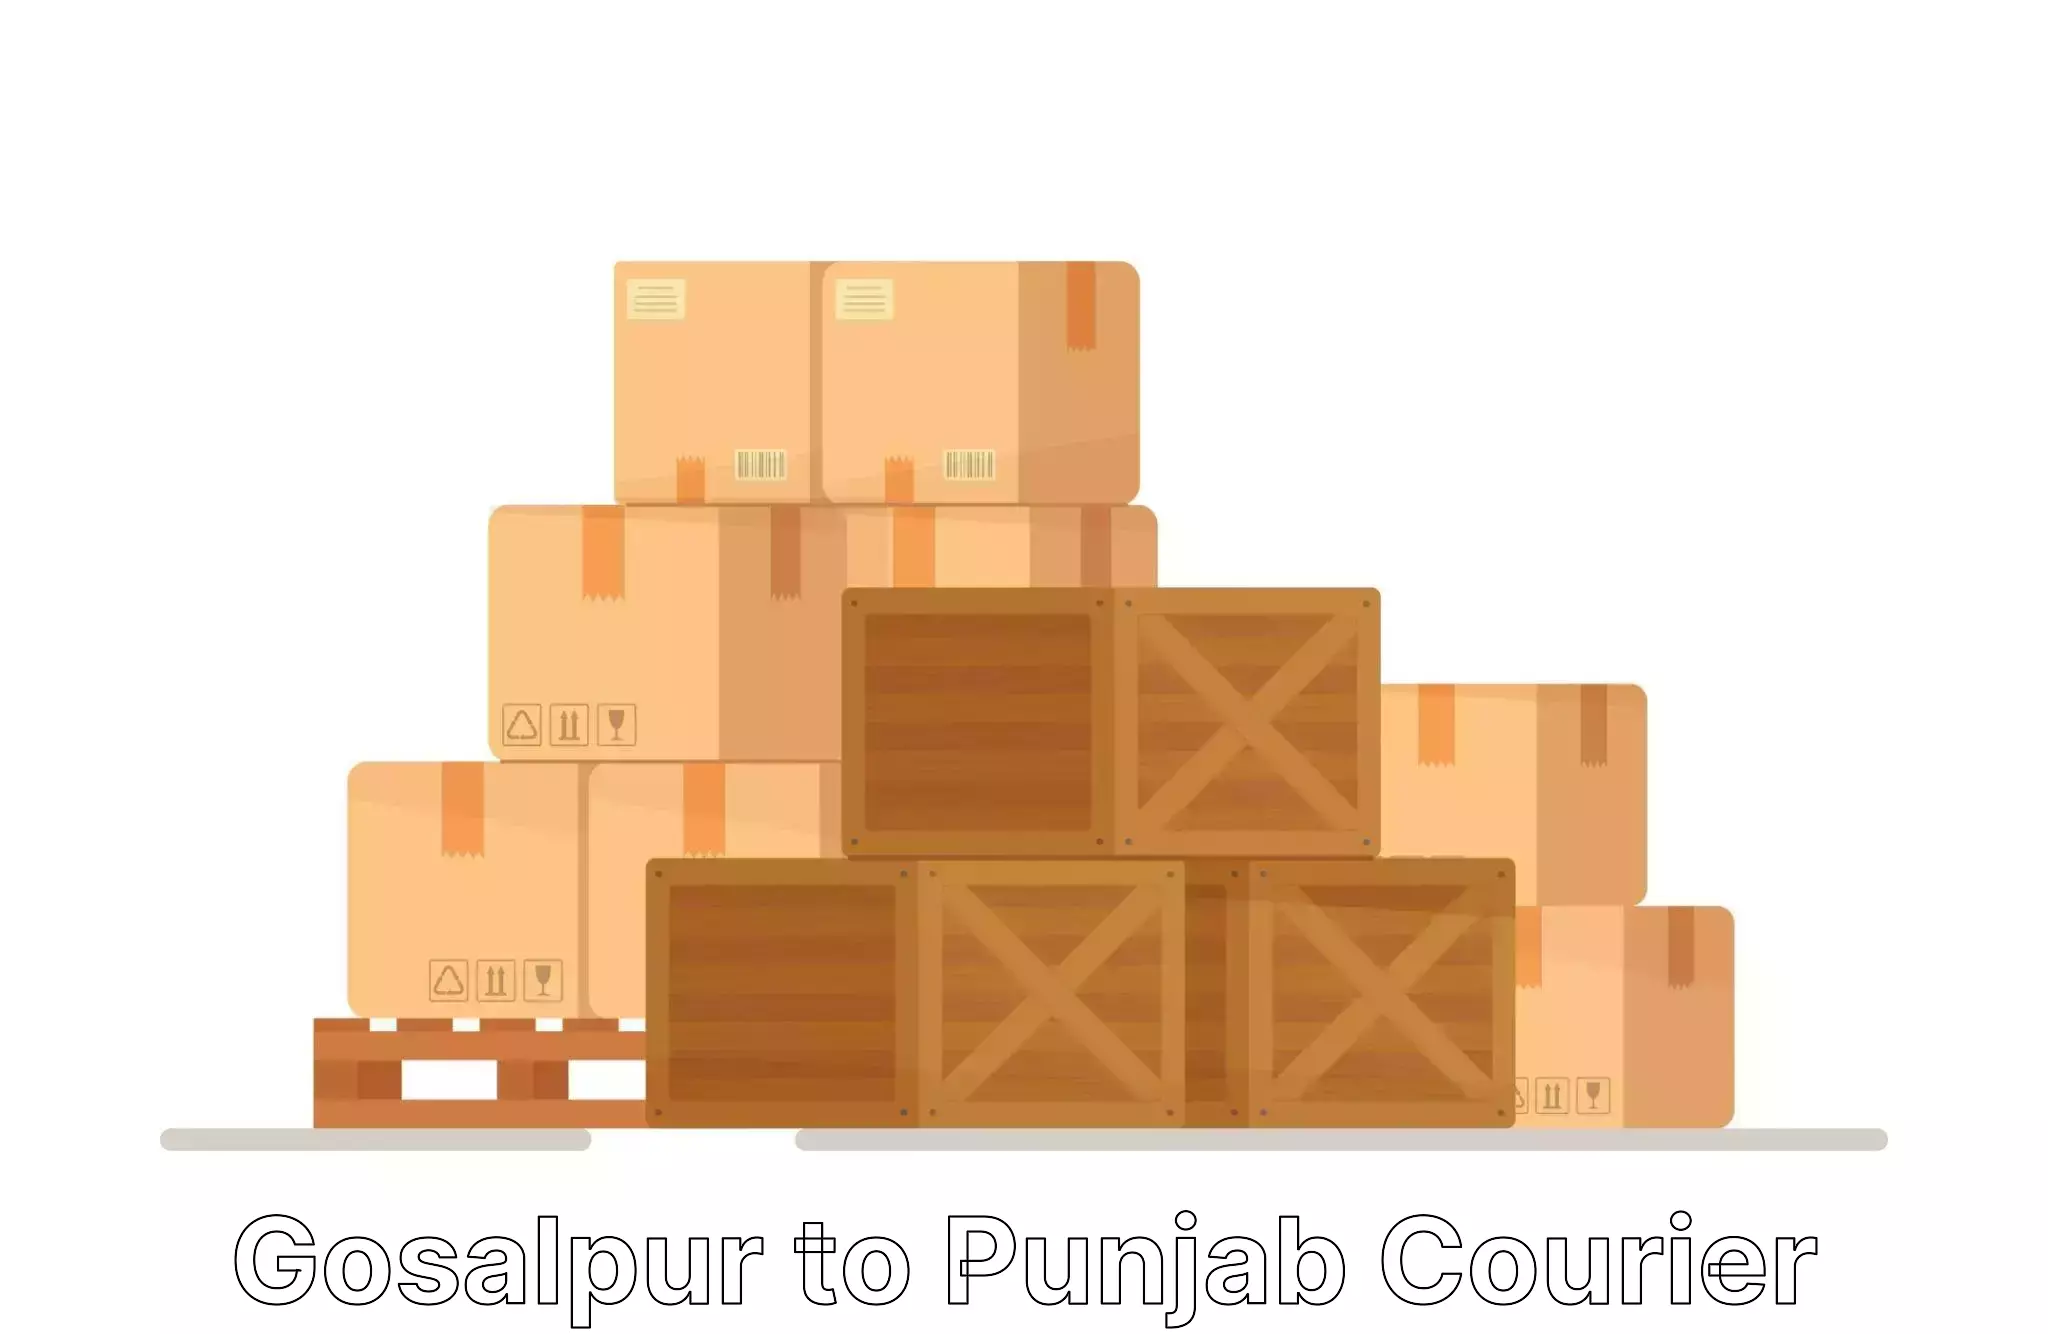 Furniture moving plans in Gosalpur to Firozpur